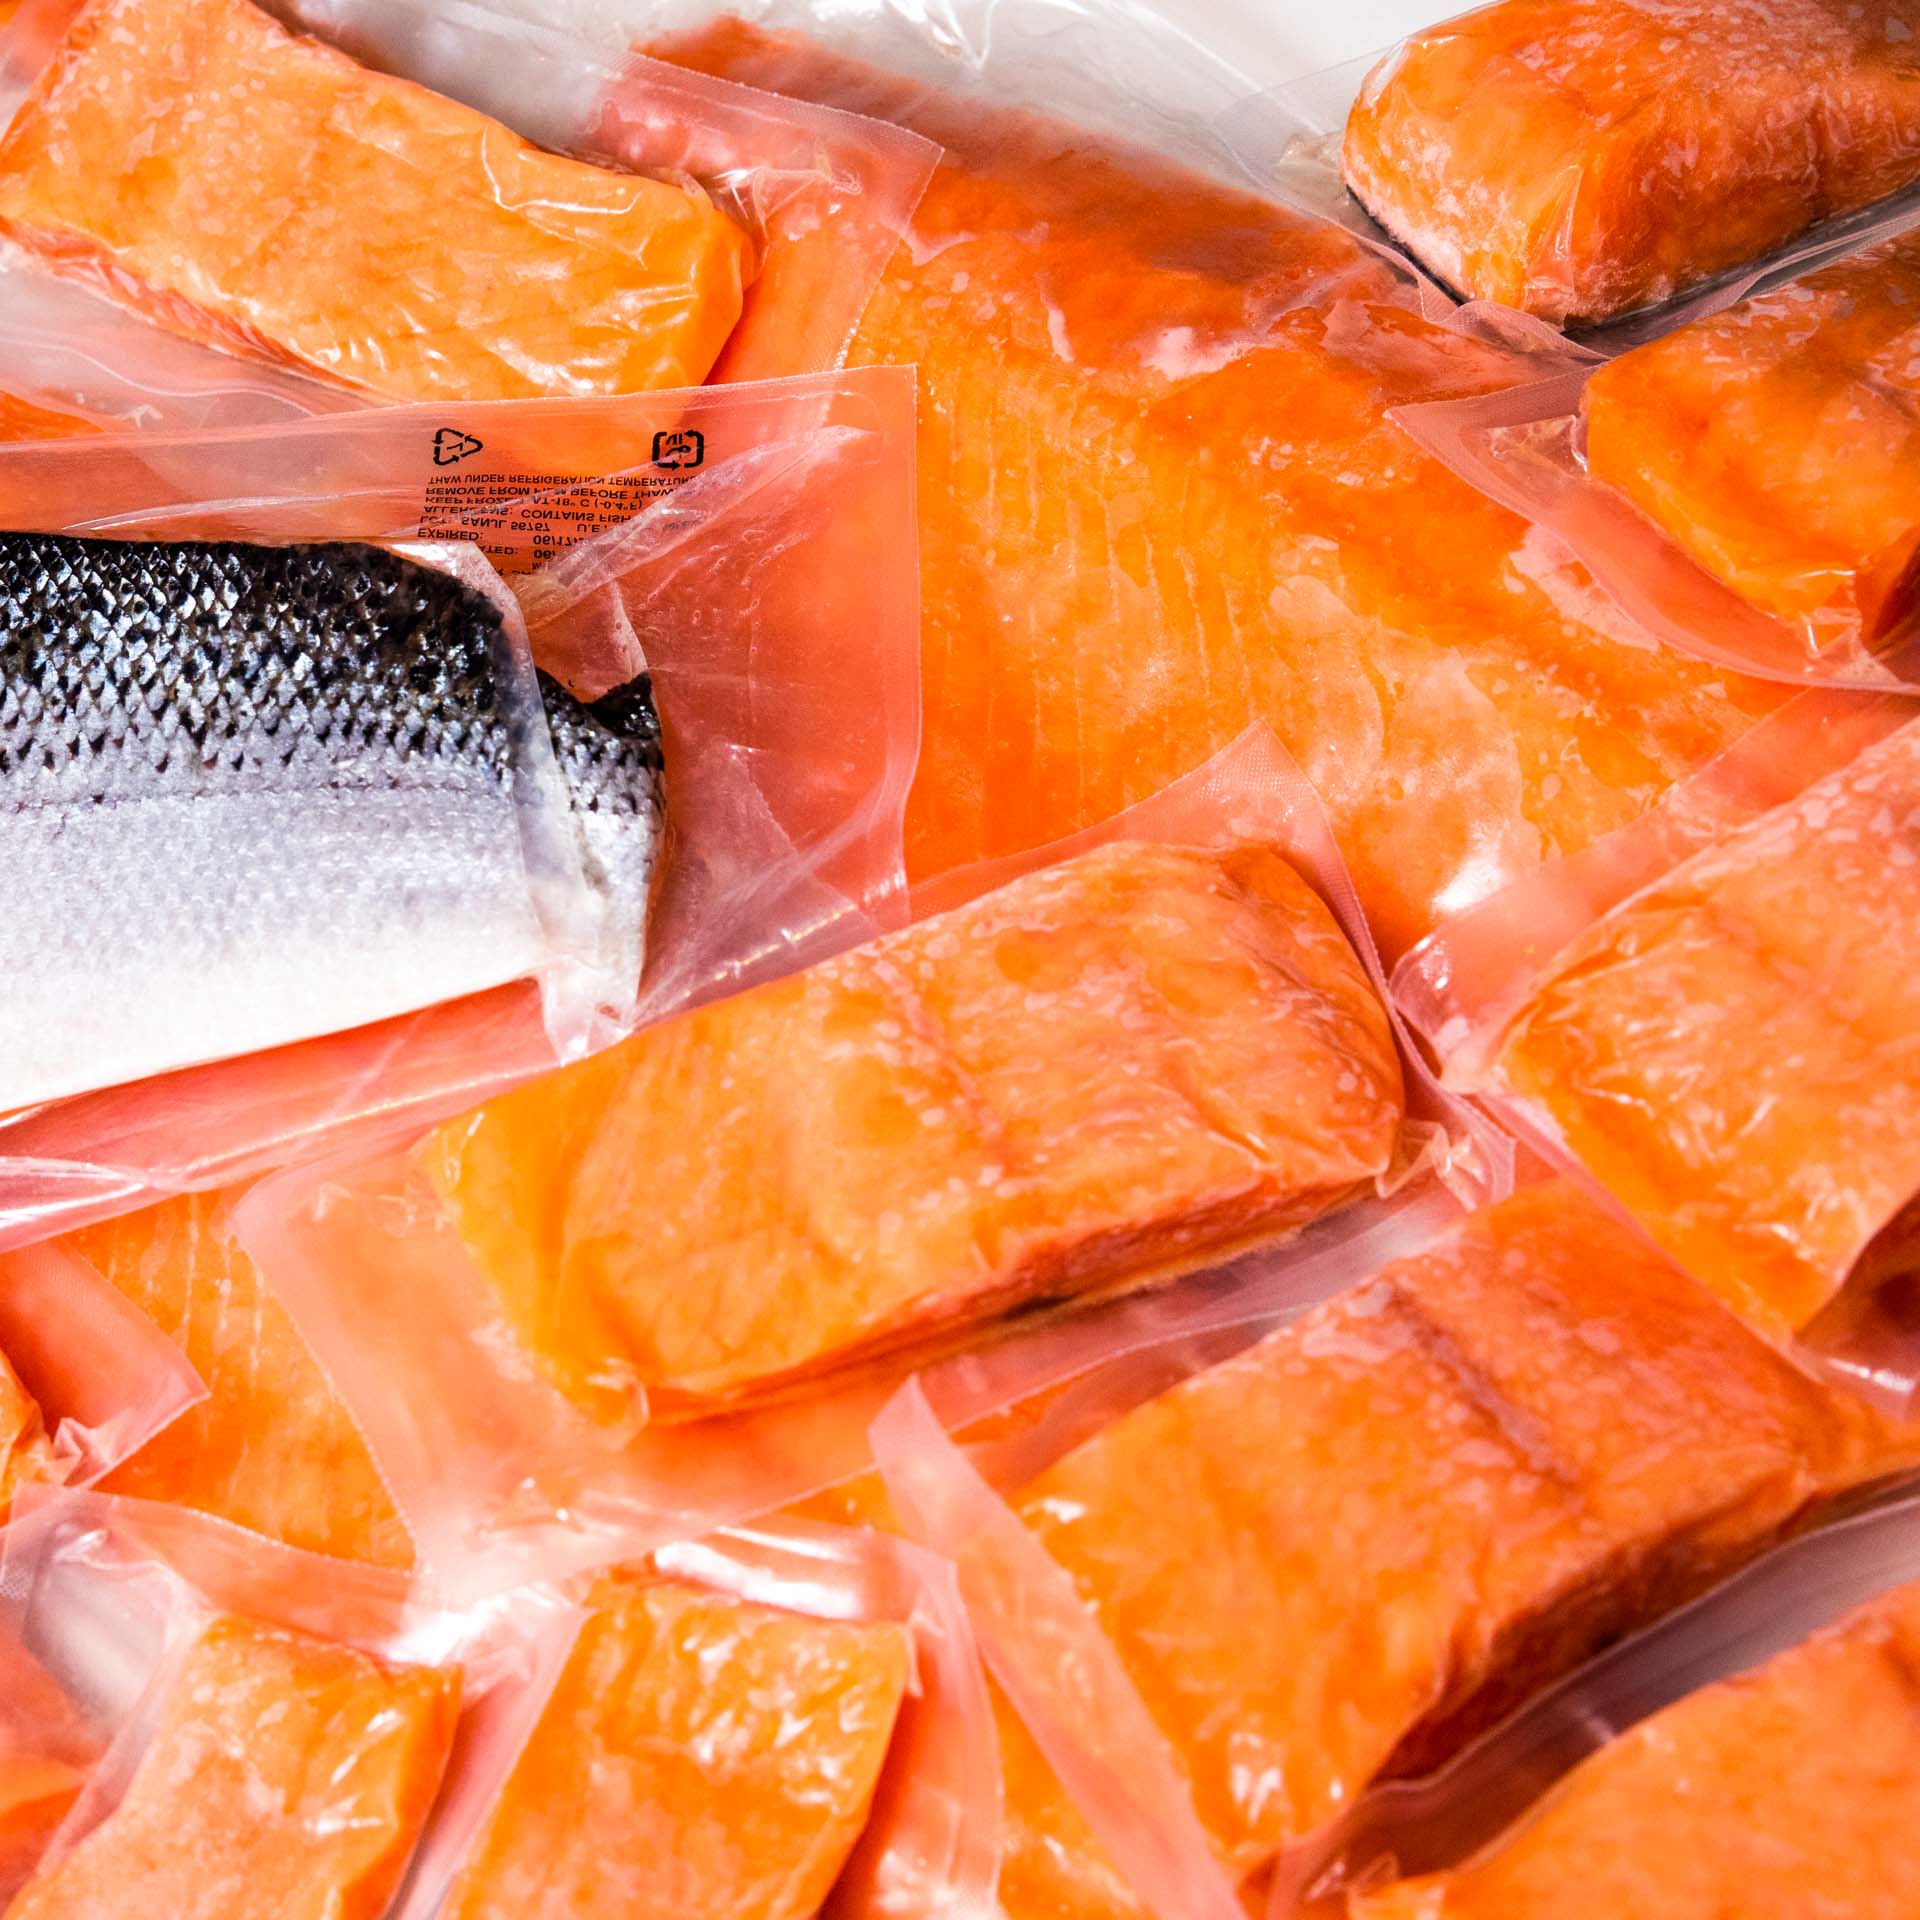 Pile of packaged salmon filets, one with skin side facing up.